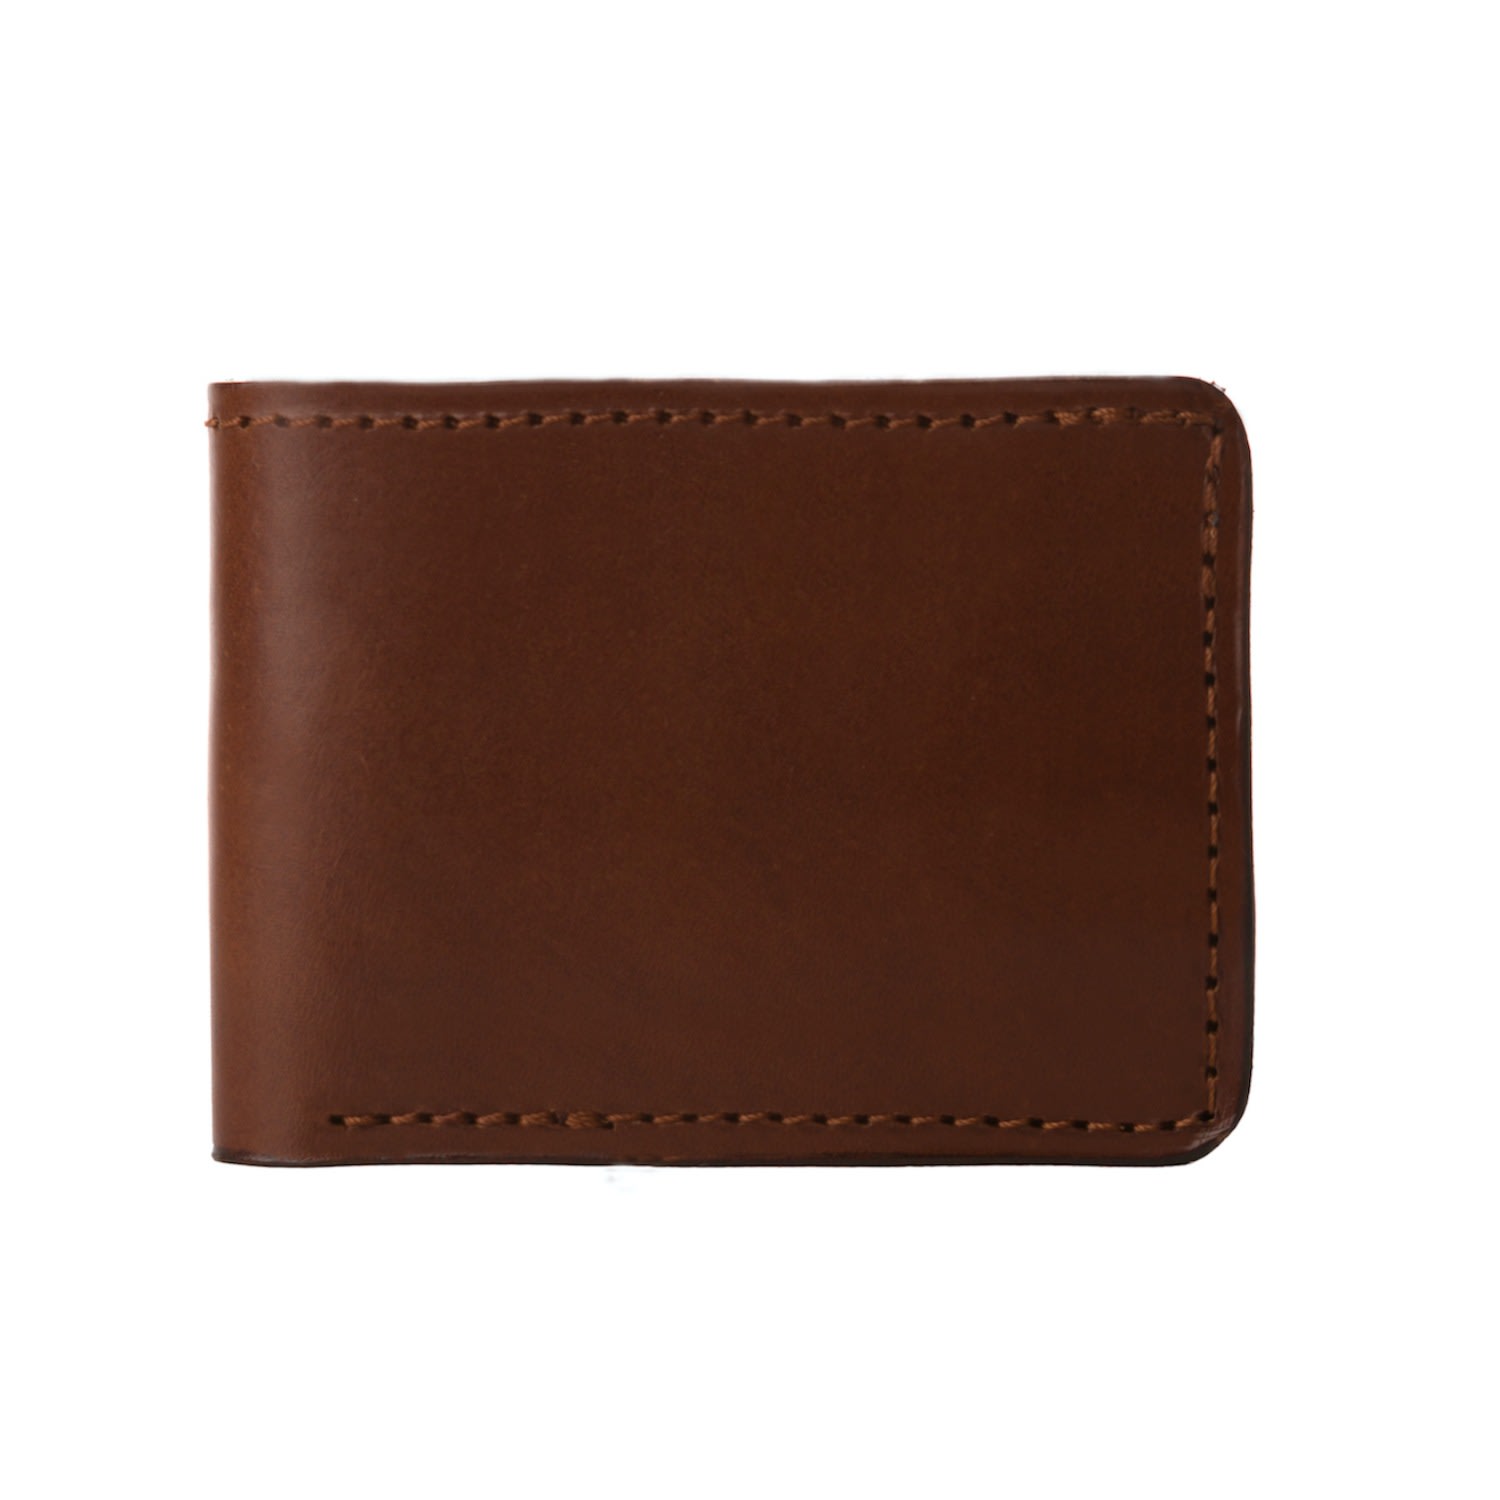 The Dust Company Men's Brown Leather Wallet In Cuoio Havana